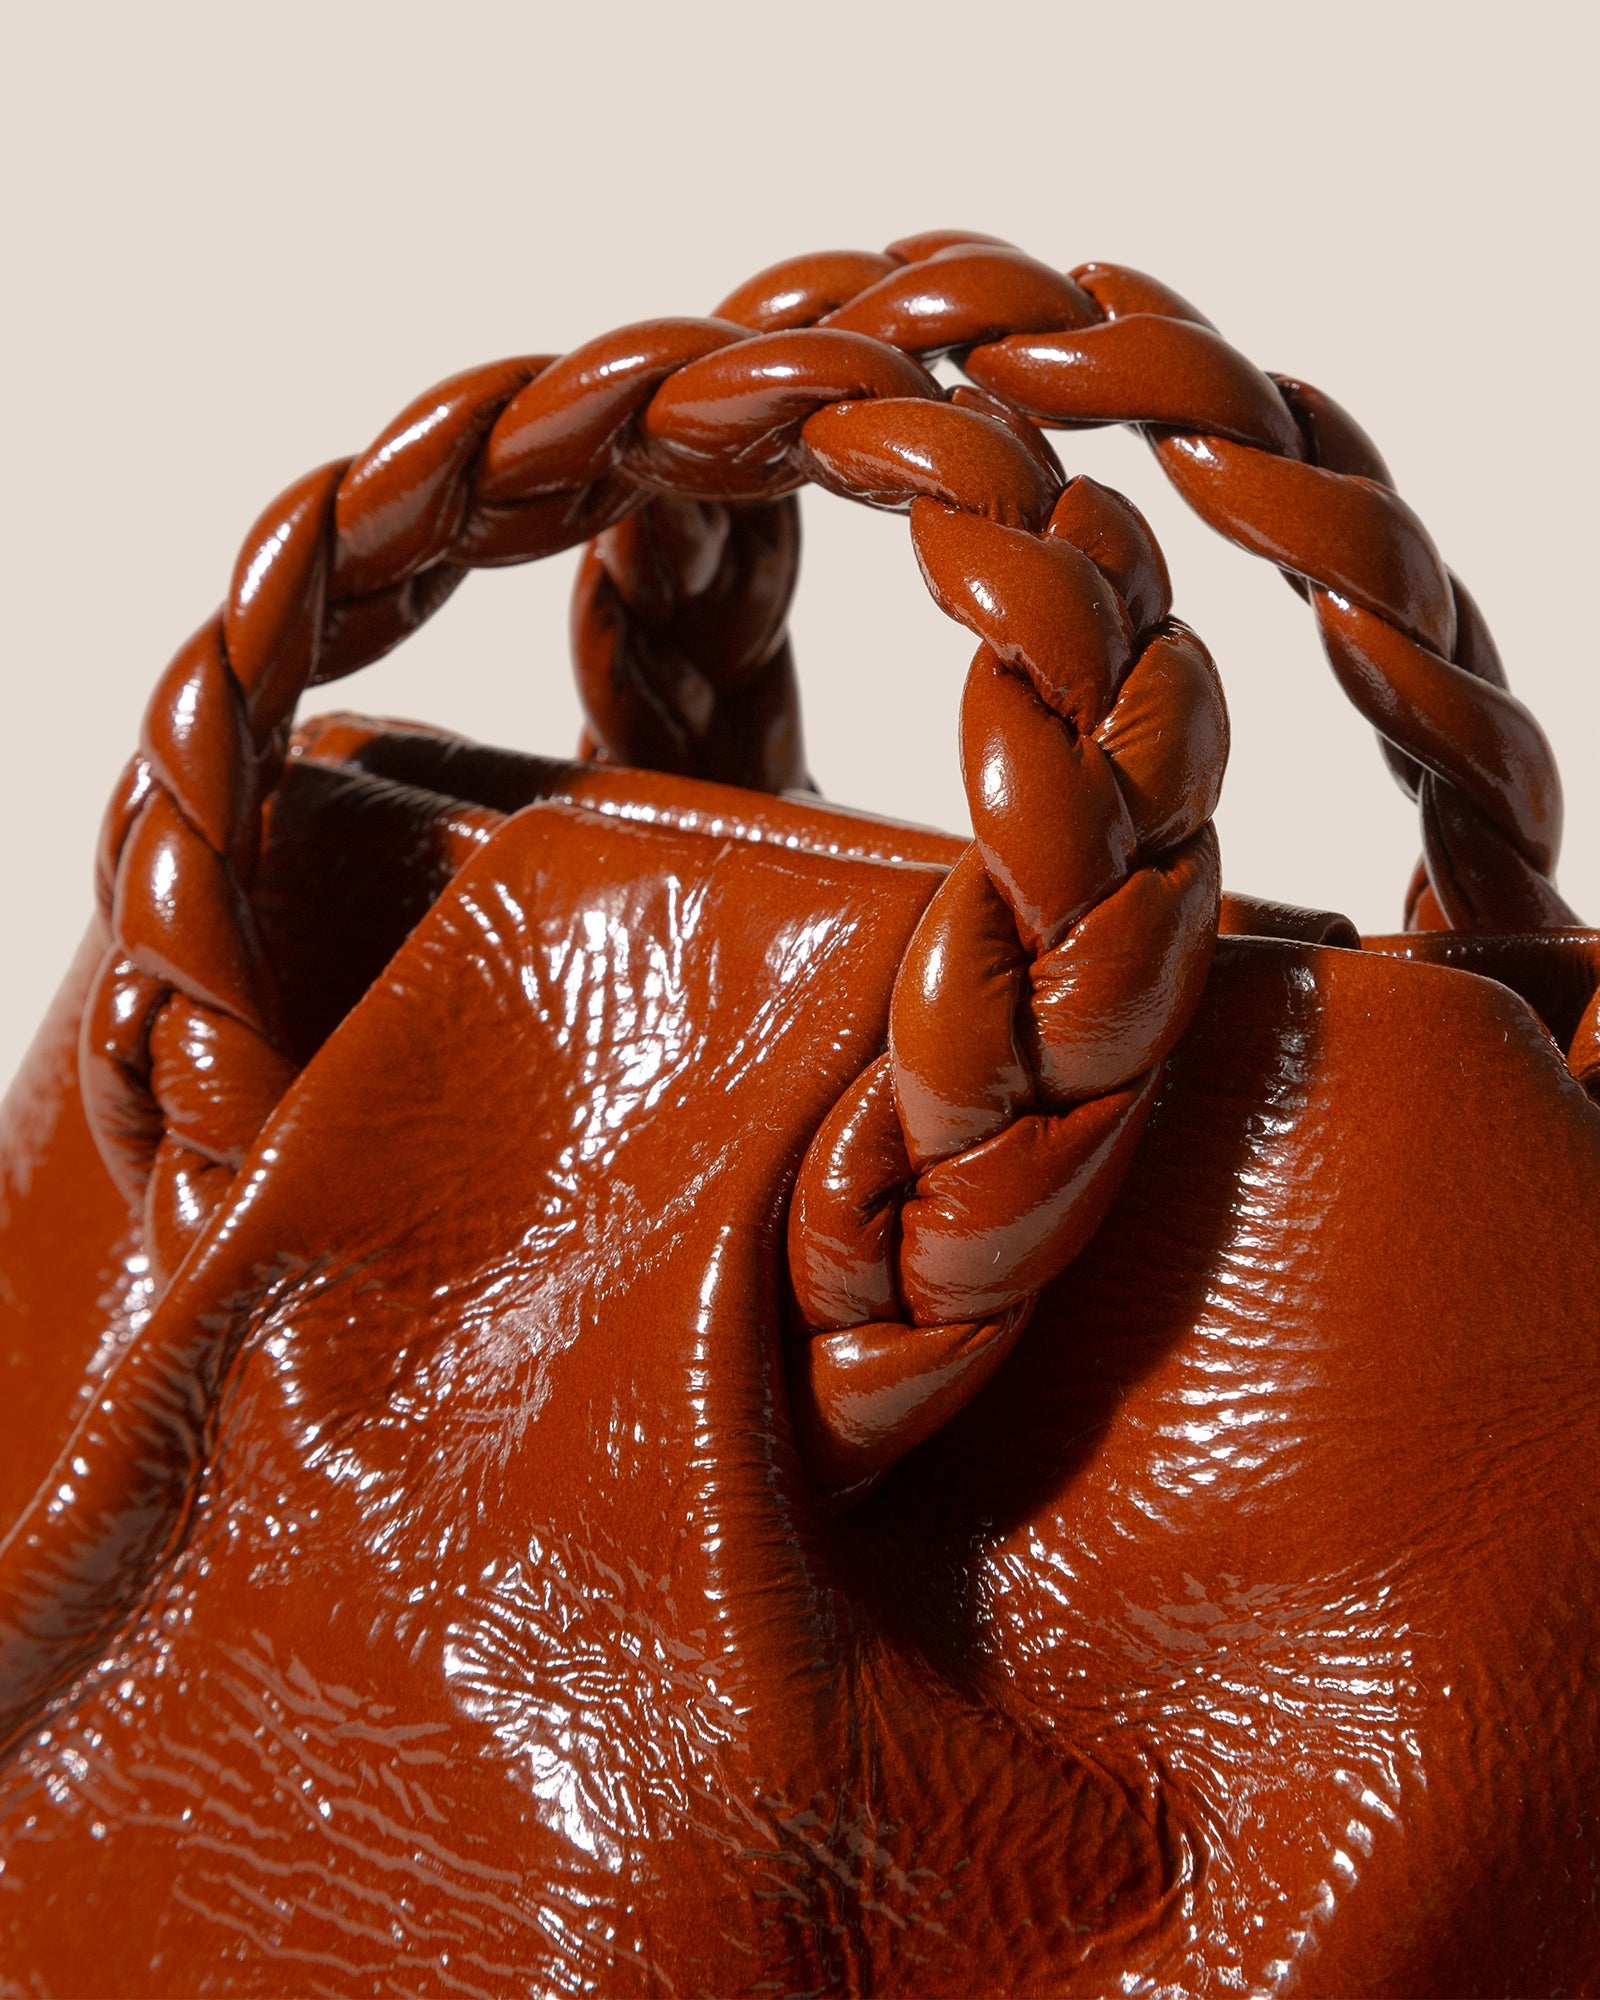 BOMBON CRINKLED GLOSSY - Small Plaited-handle Leather Crossbody